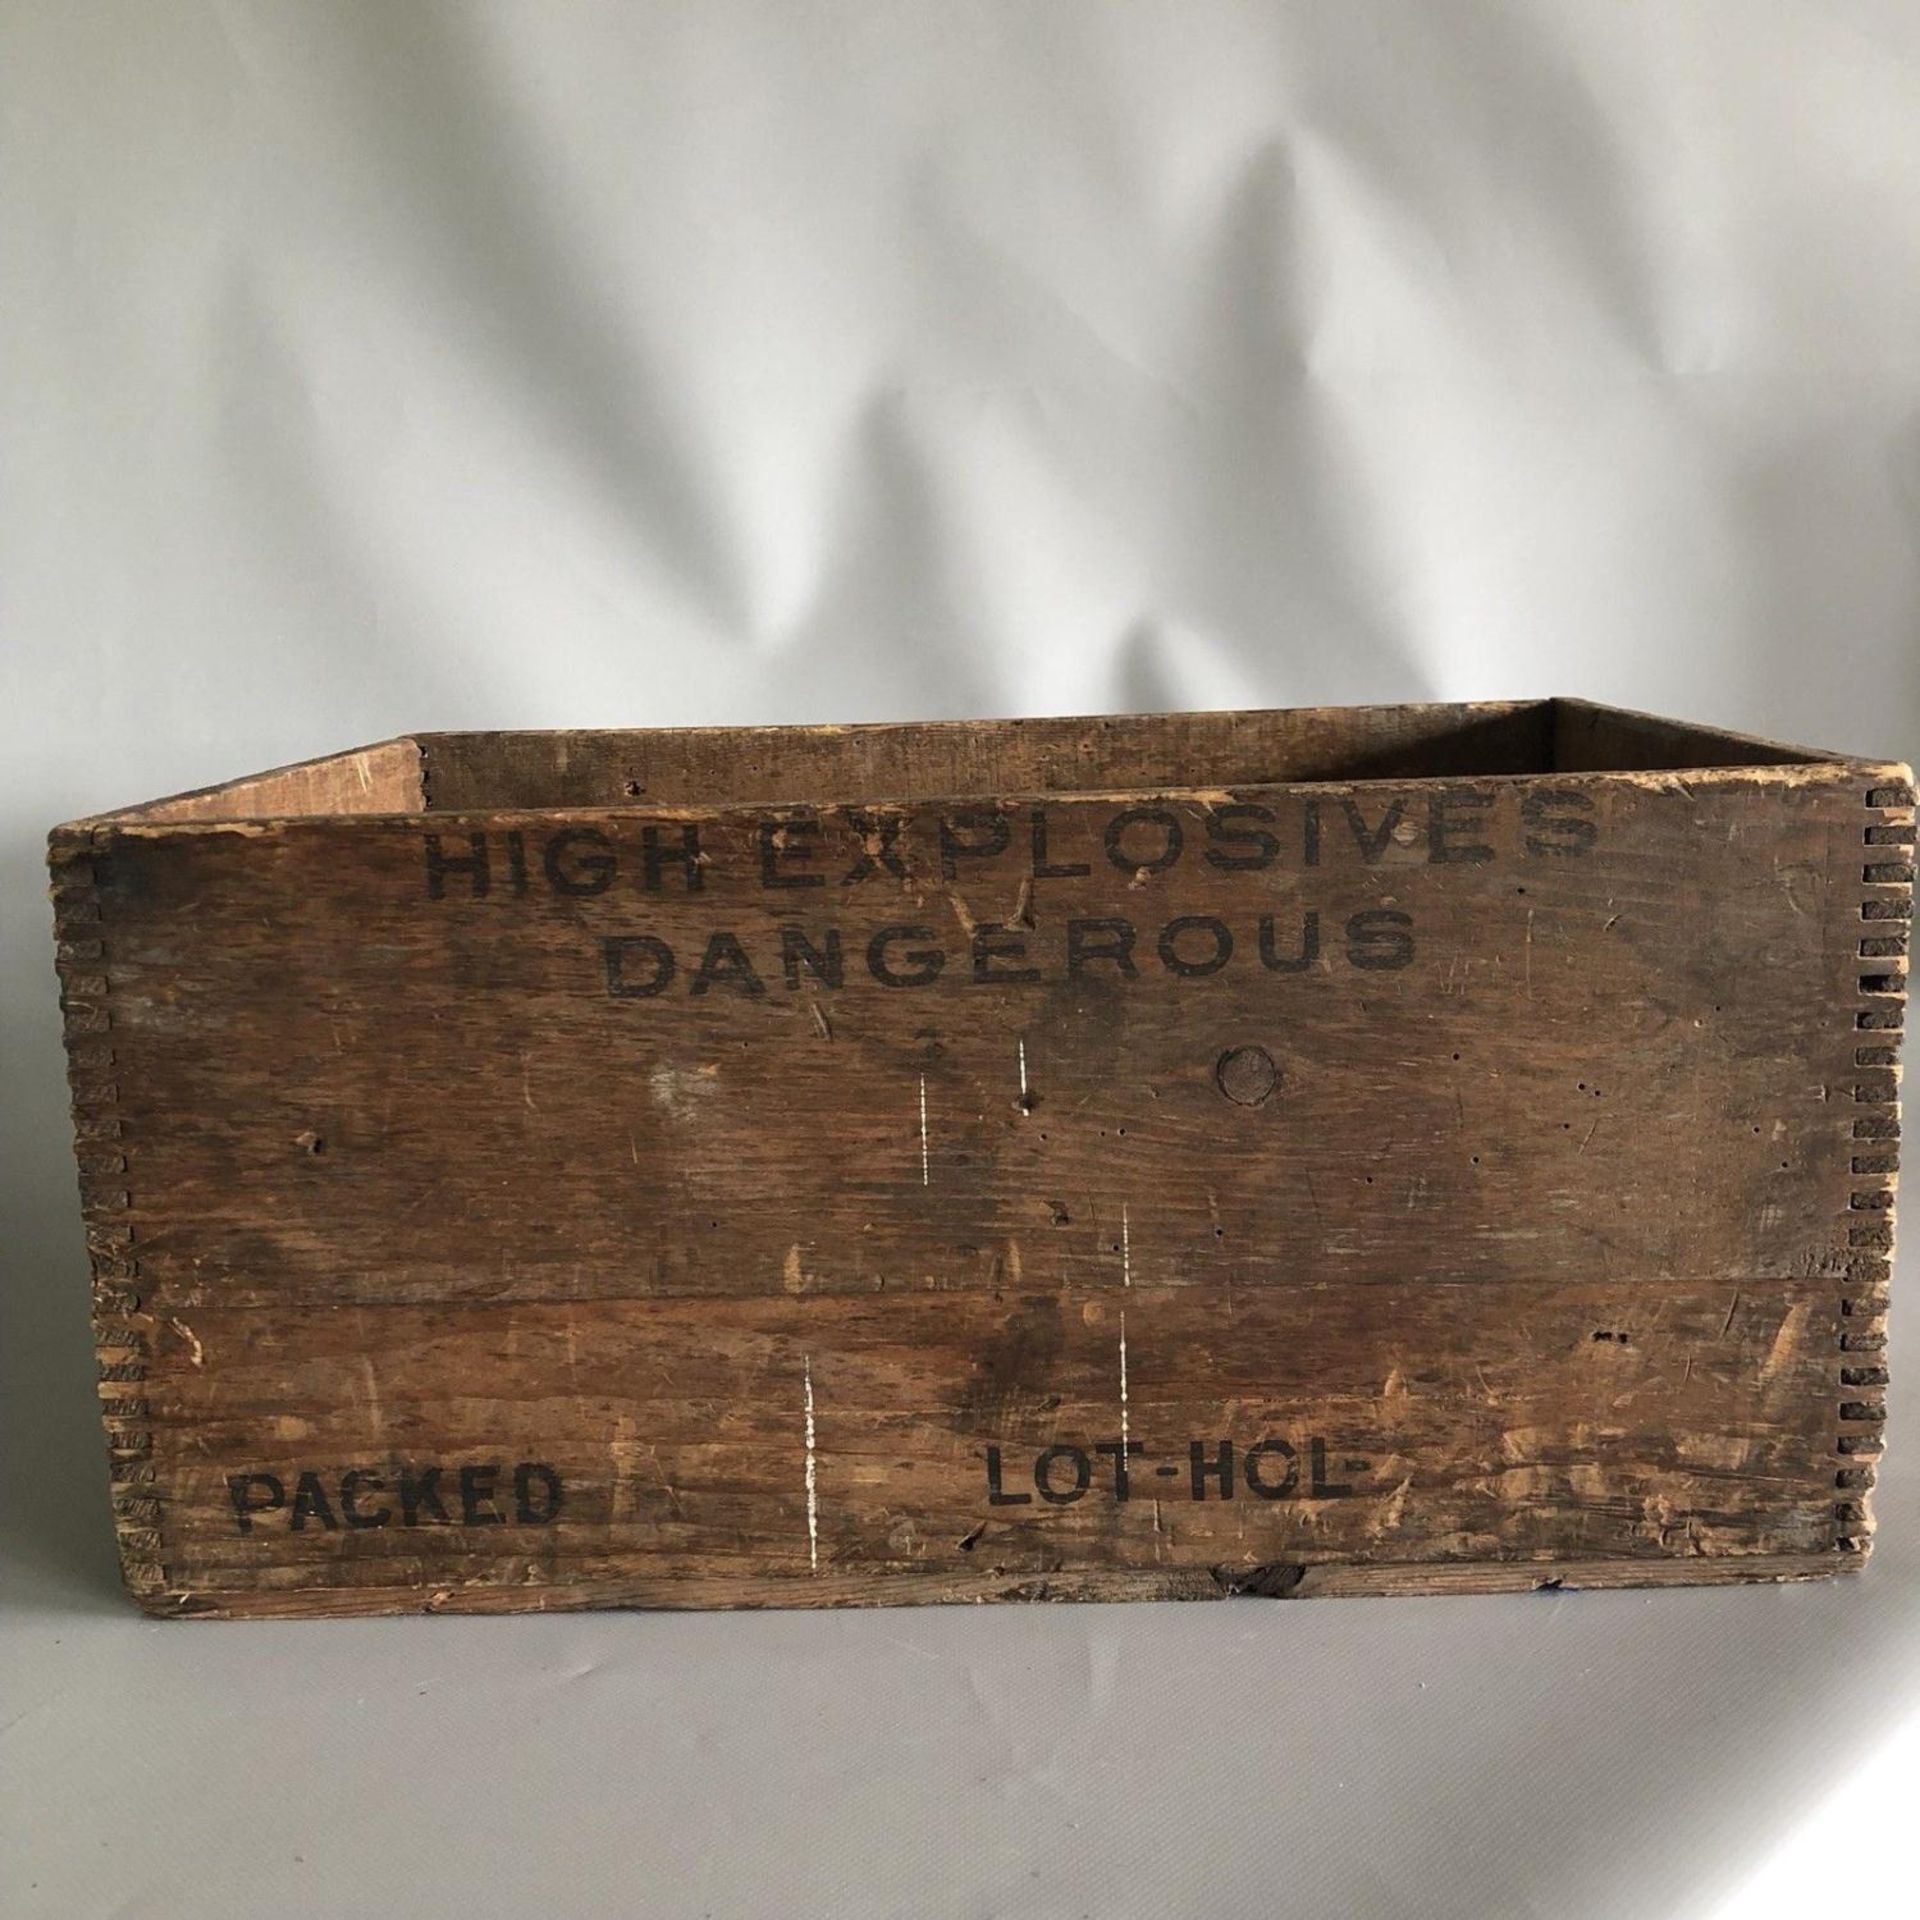 Vintage Military Holston Ordnance High Explosive Wooden Ammunition Box Crate - Image 2 of 4